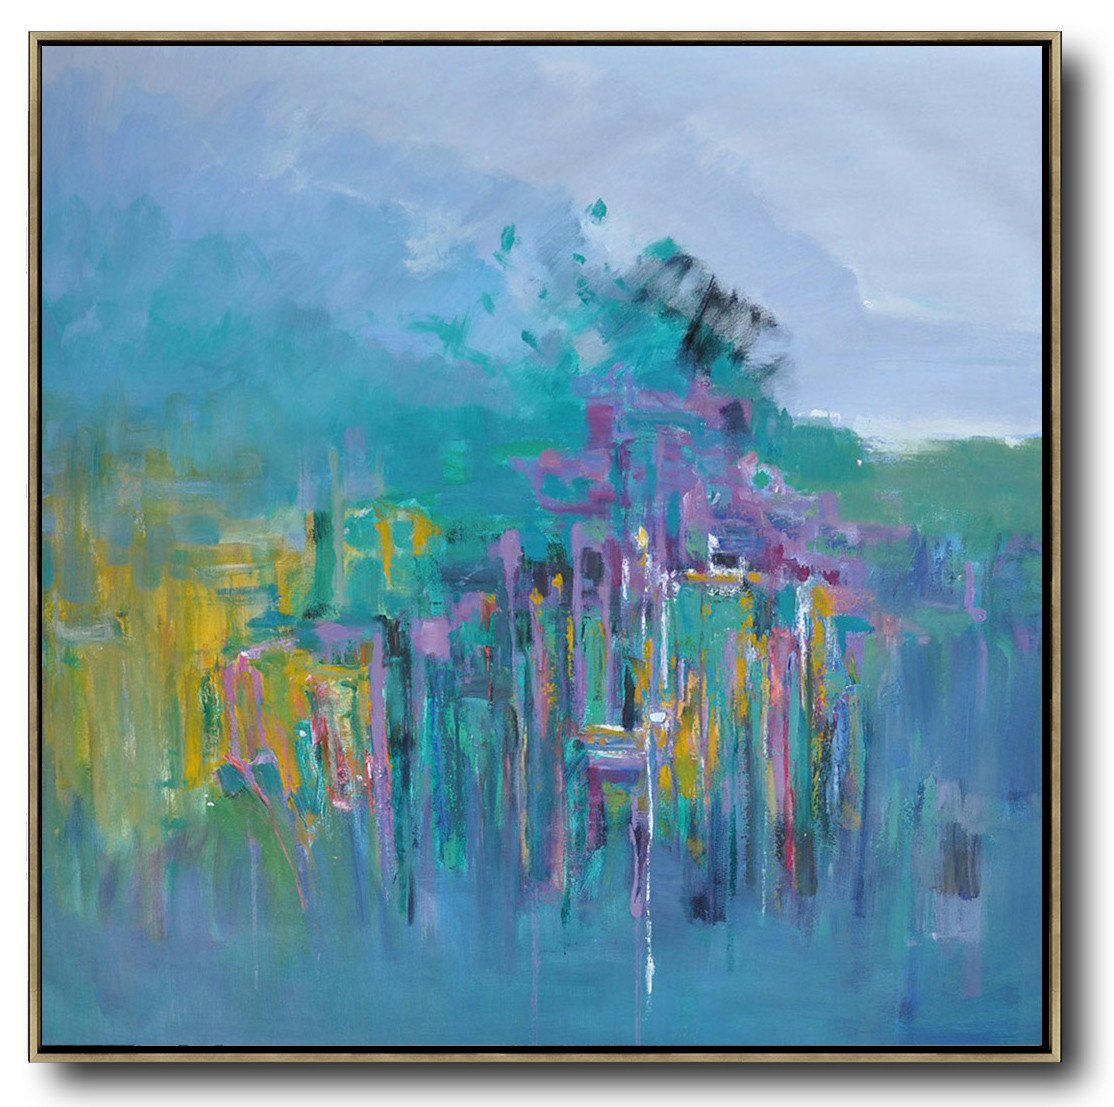 Extra Large Abstract Painting On Canvas,Oversized Abstract Landscape Oil Painting,Xl Large Canvas Art,Blue,Green,Yellow,Purple.etc